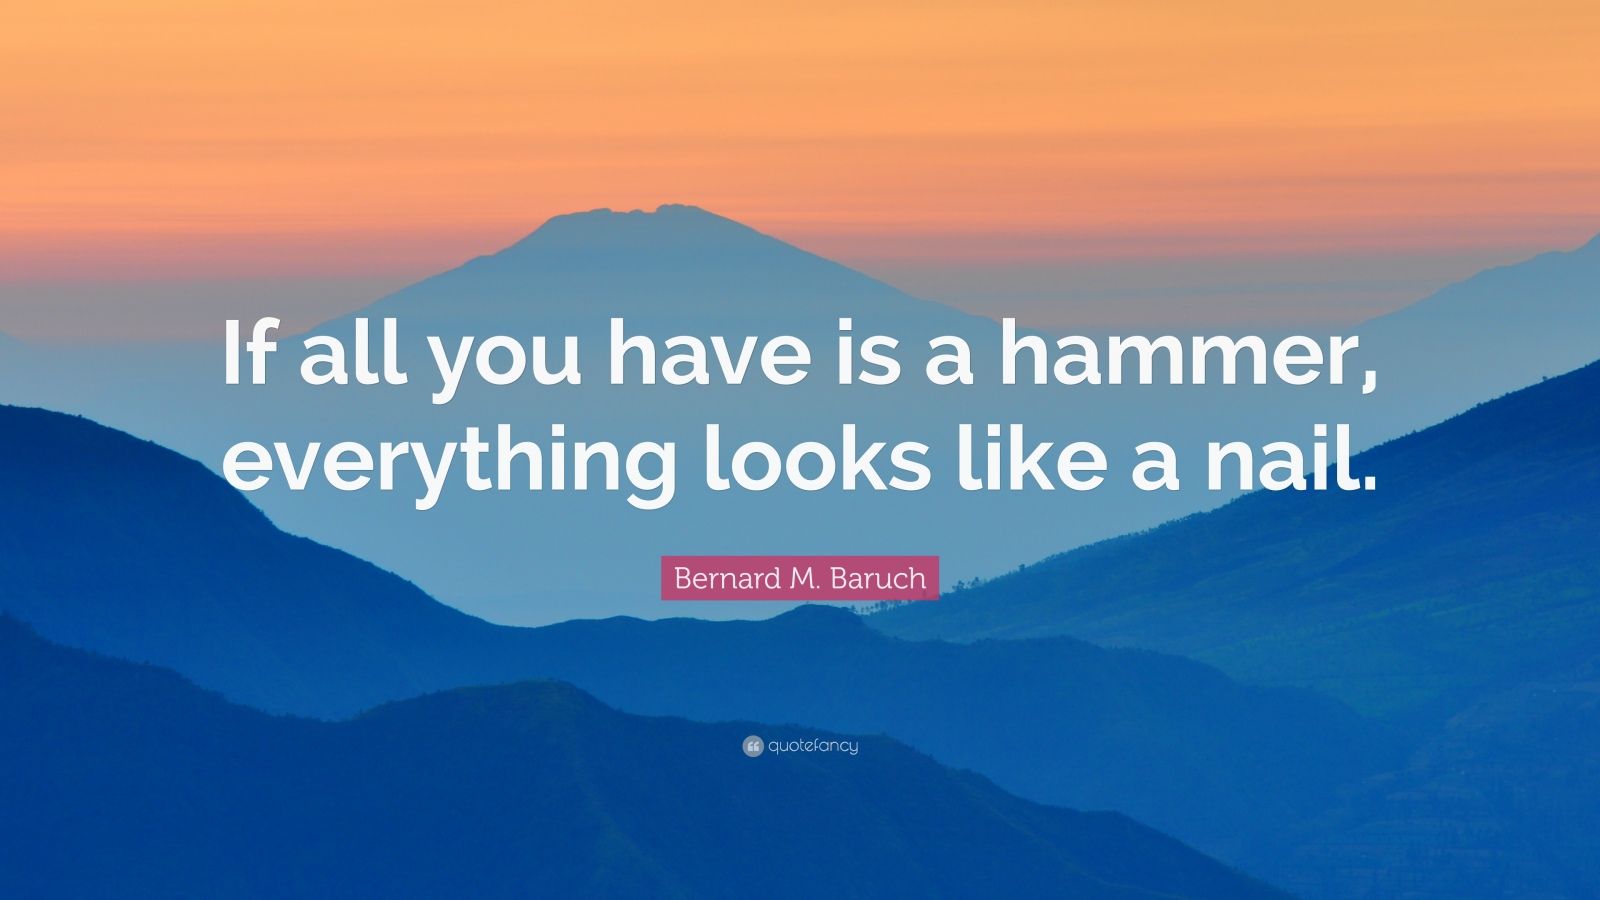 Bernard M. Baruch Quote: “If all you have is a hammer, everything looks